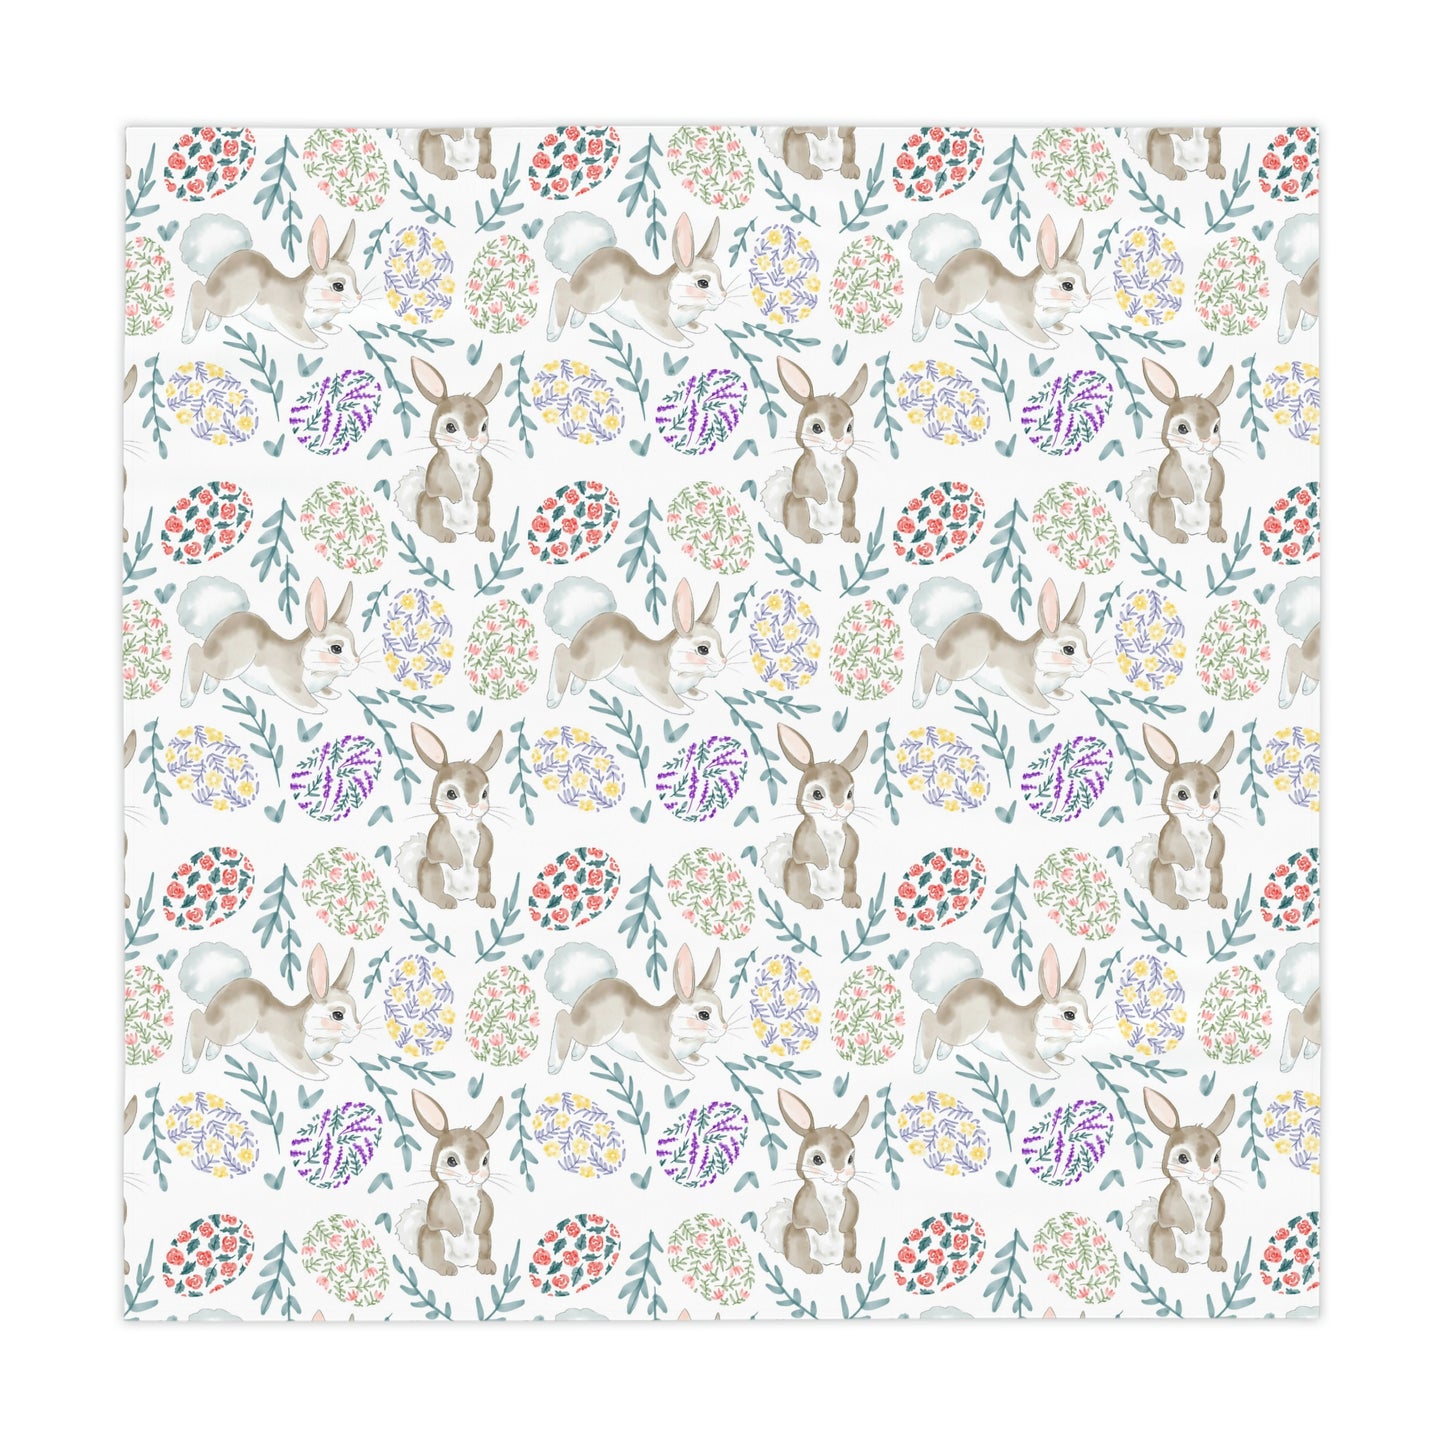 Bunnies and Easter Eggs Table Cloth